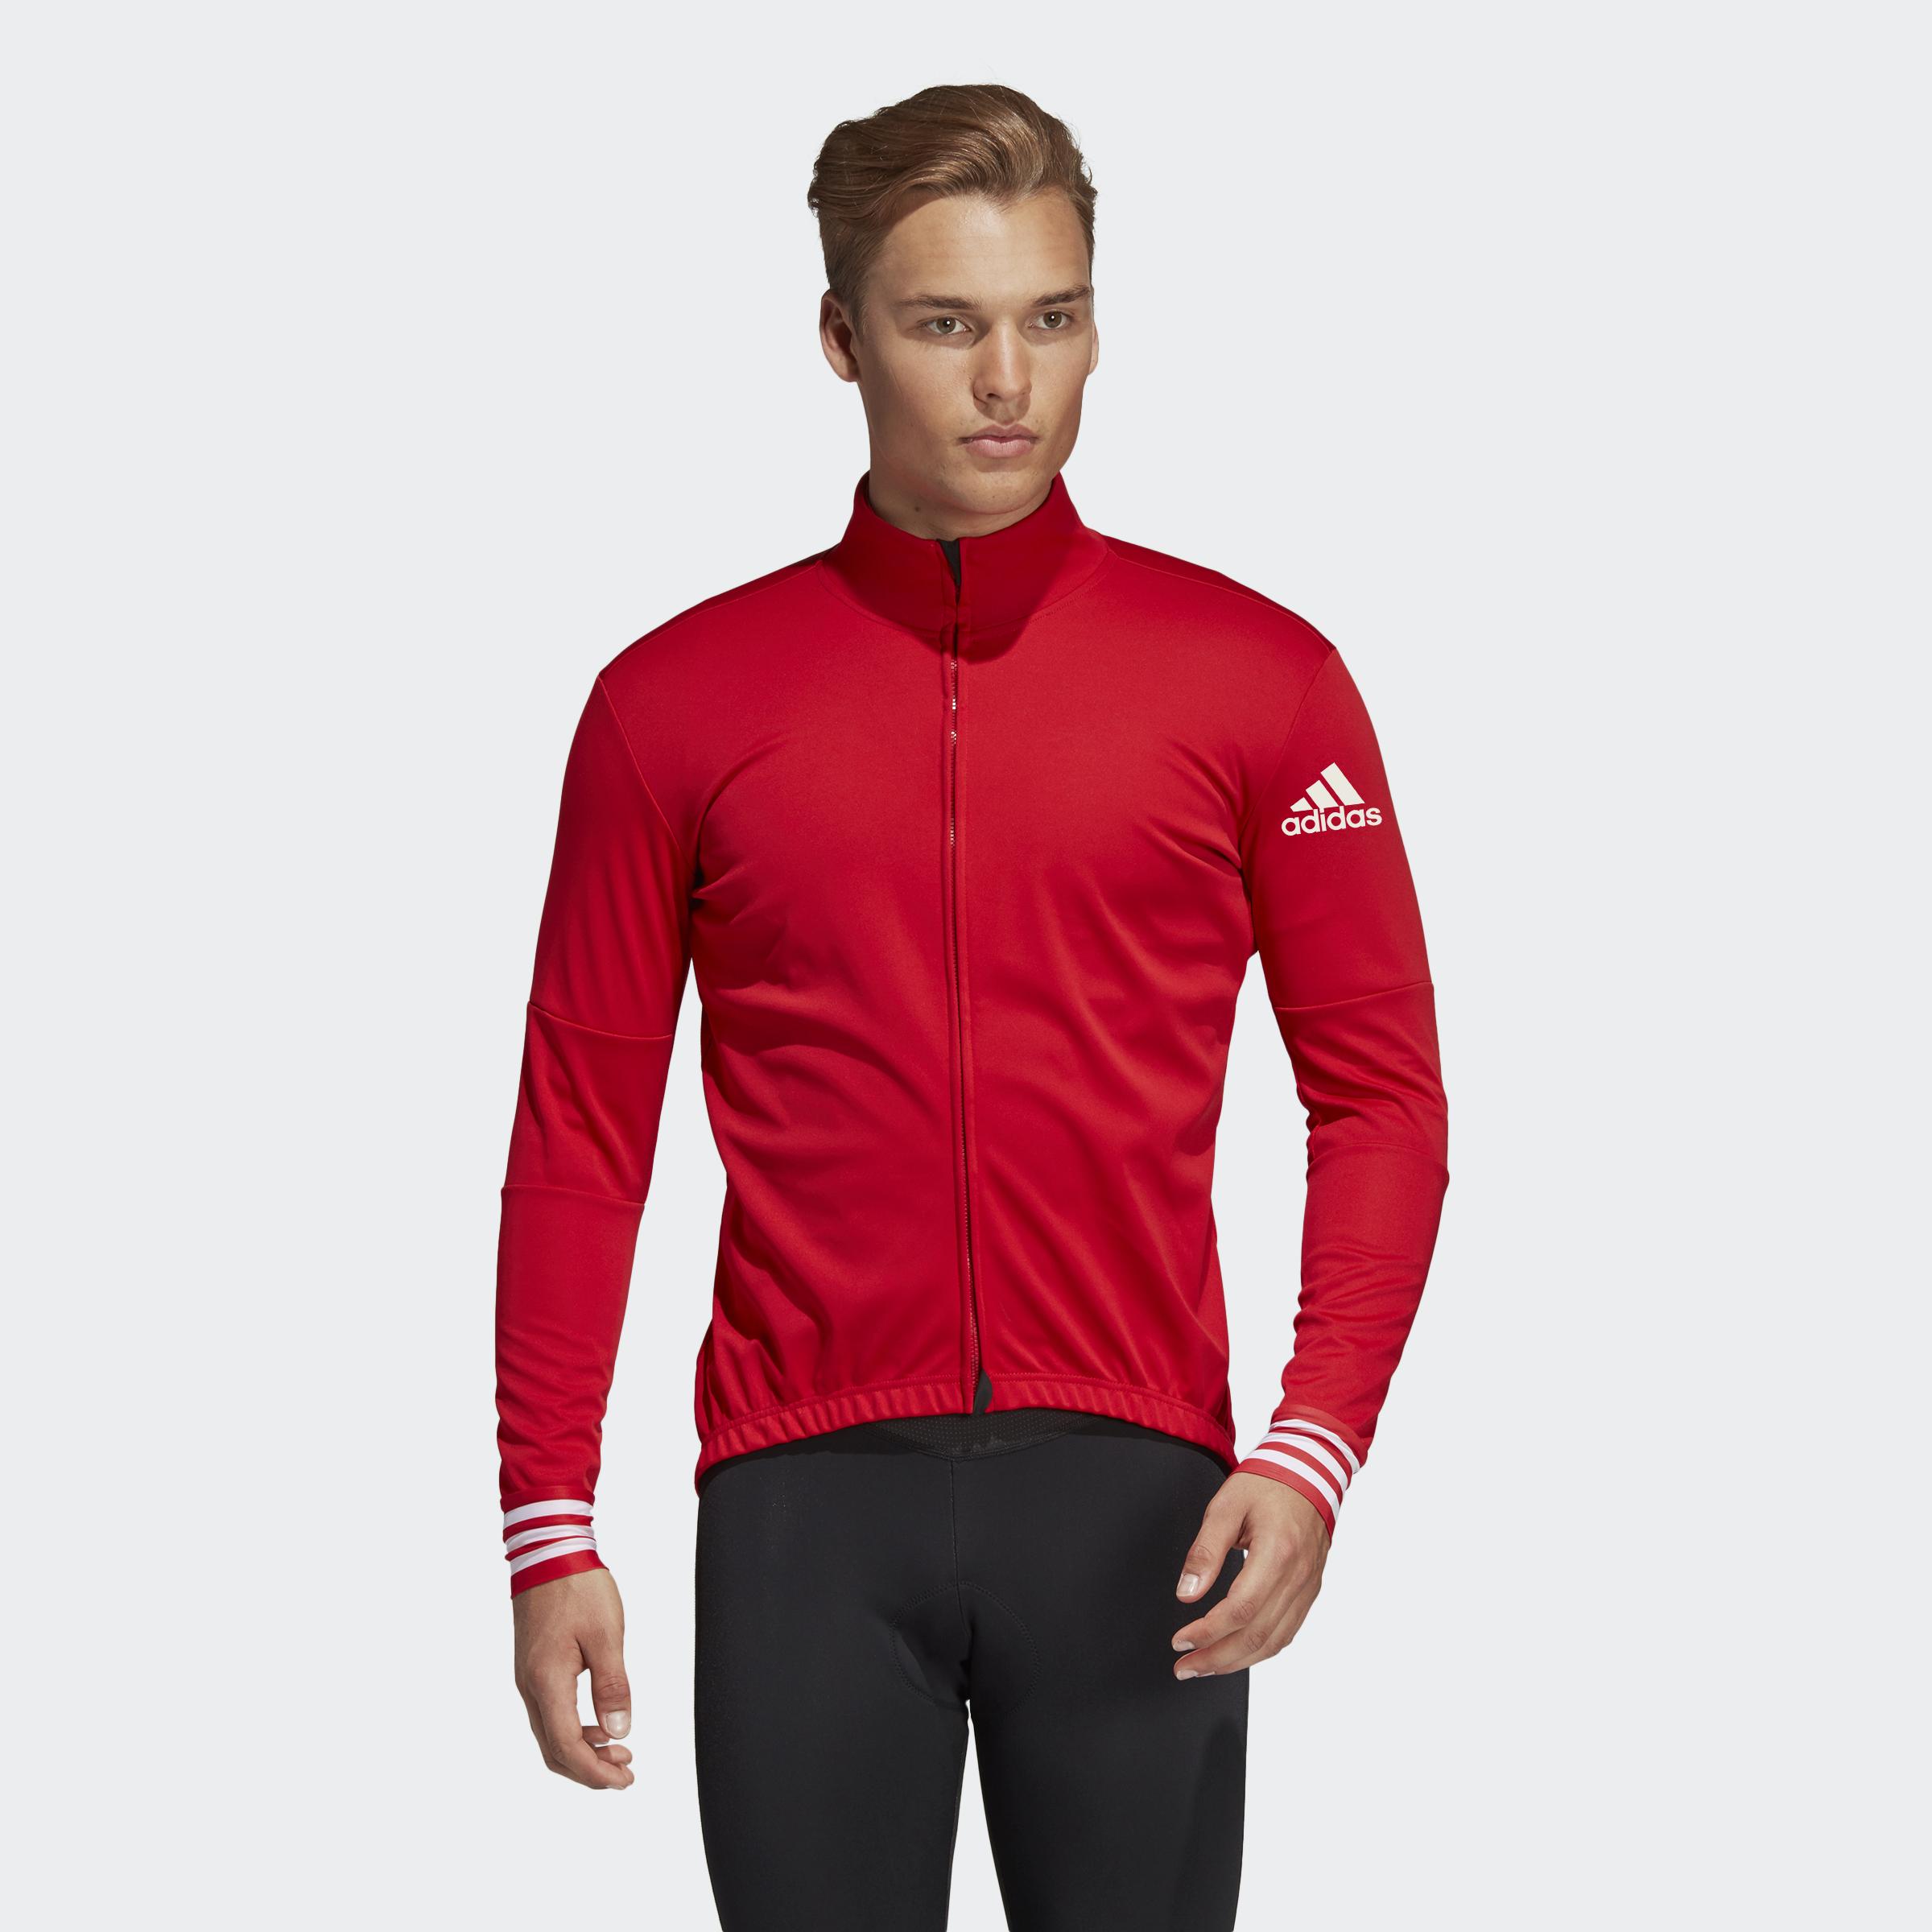 Adistar Winter Jersey Outlet, SAVE 60%.